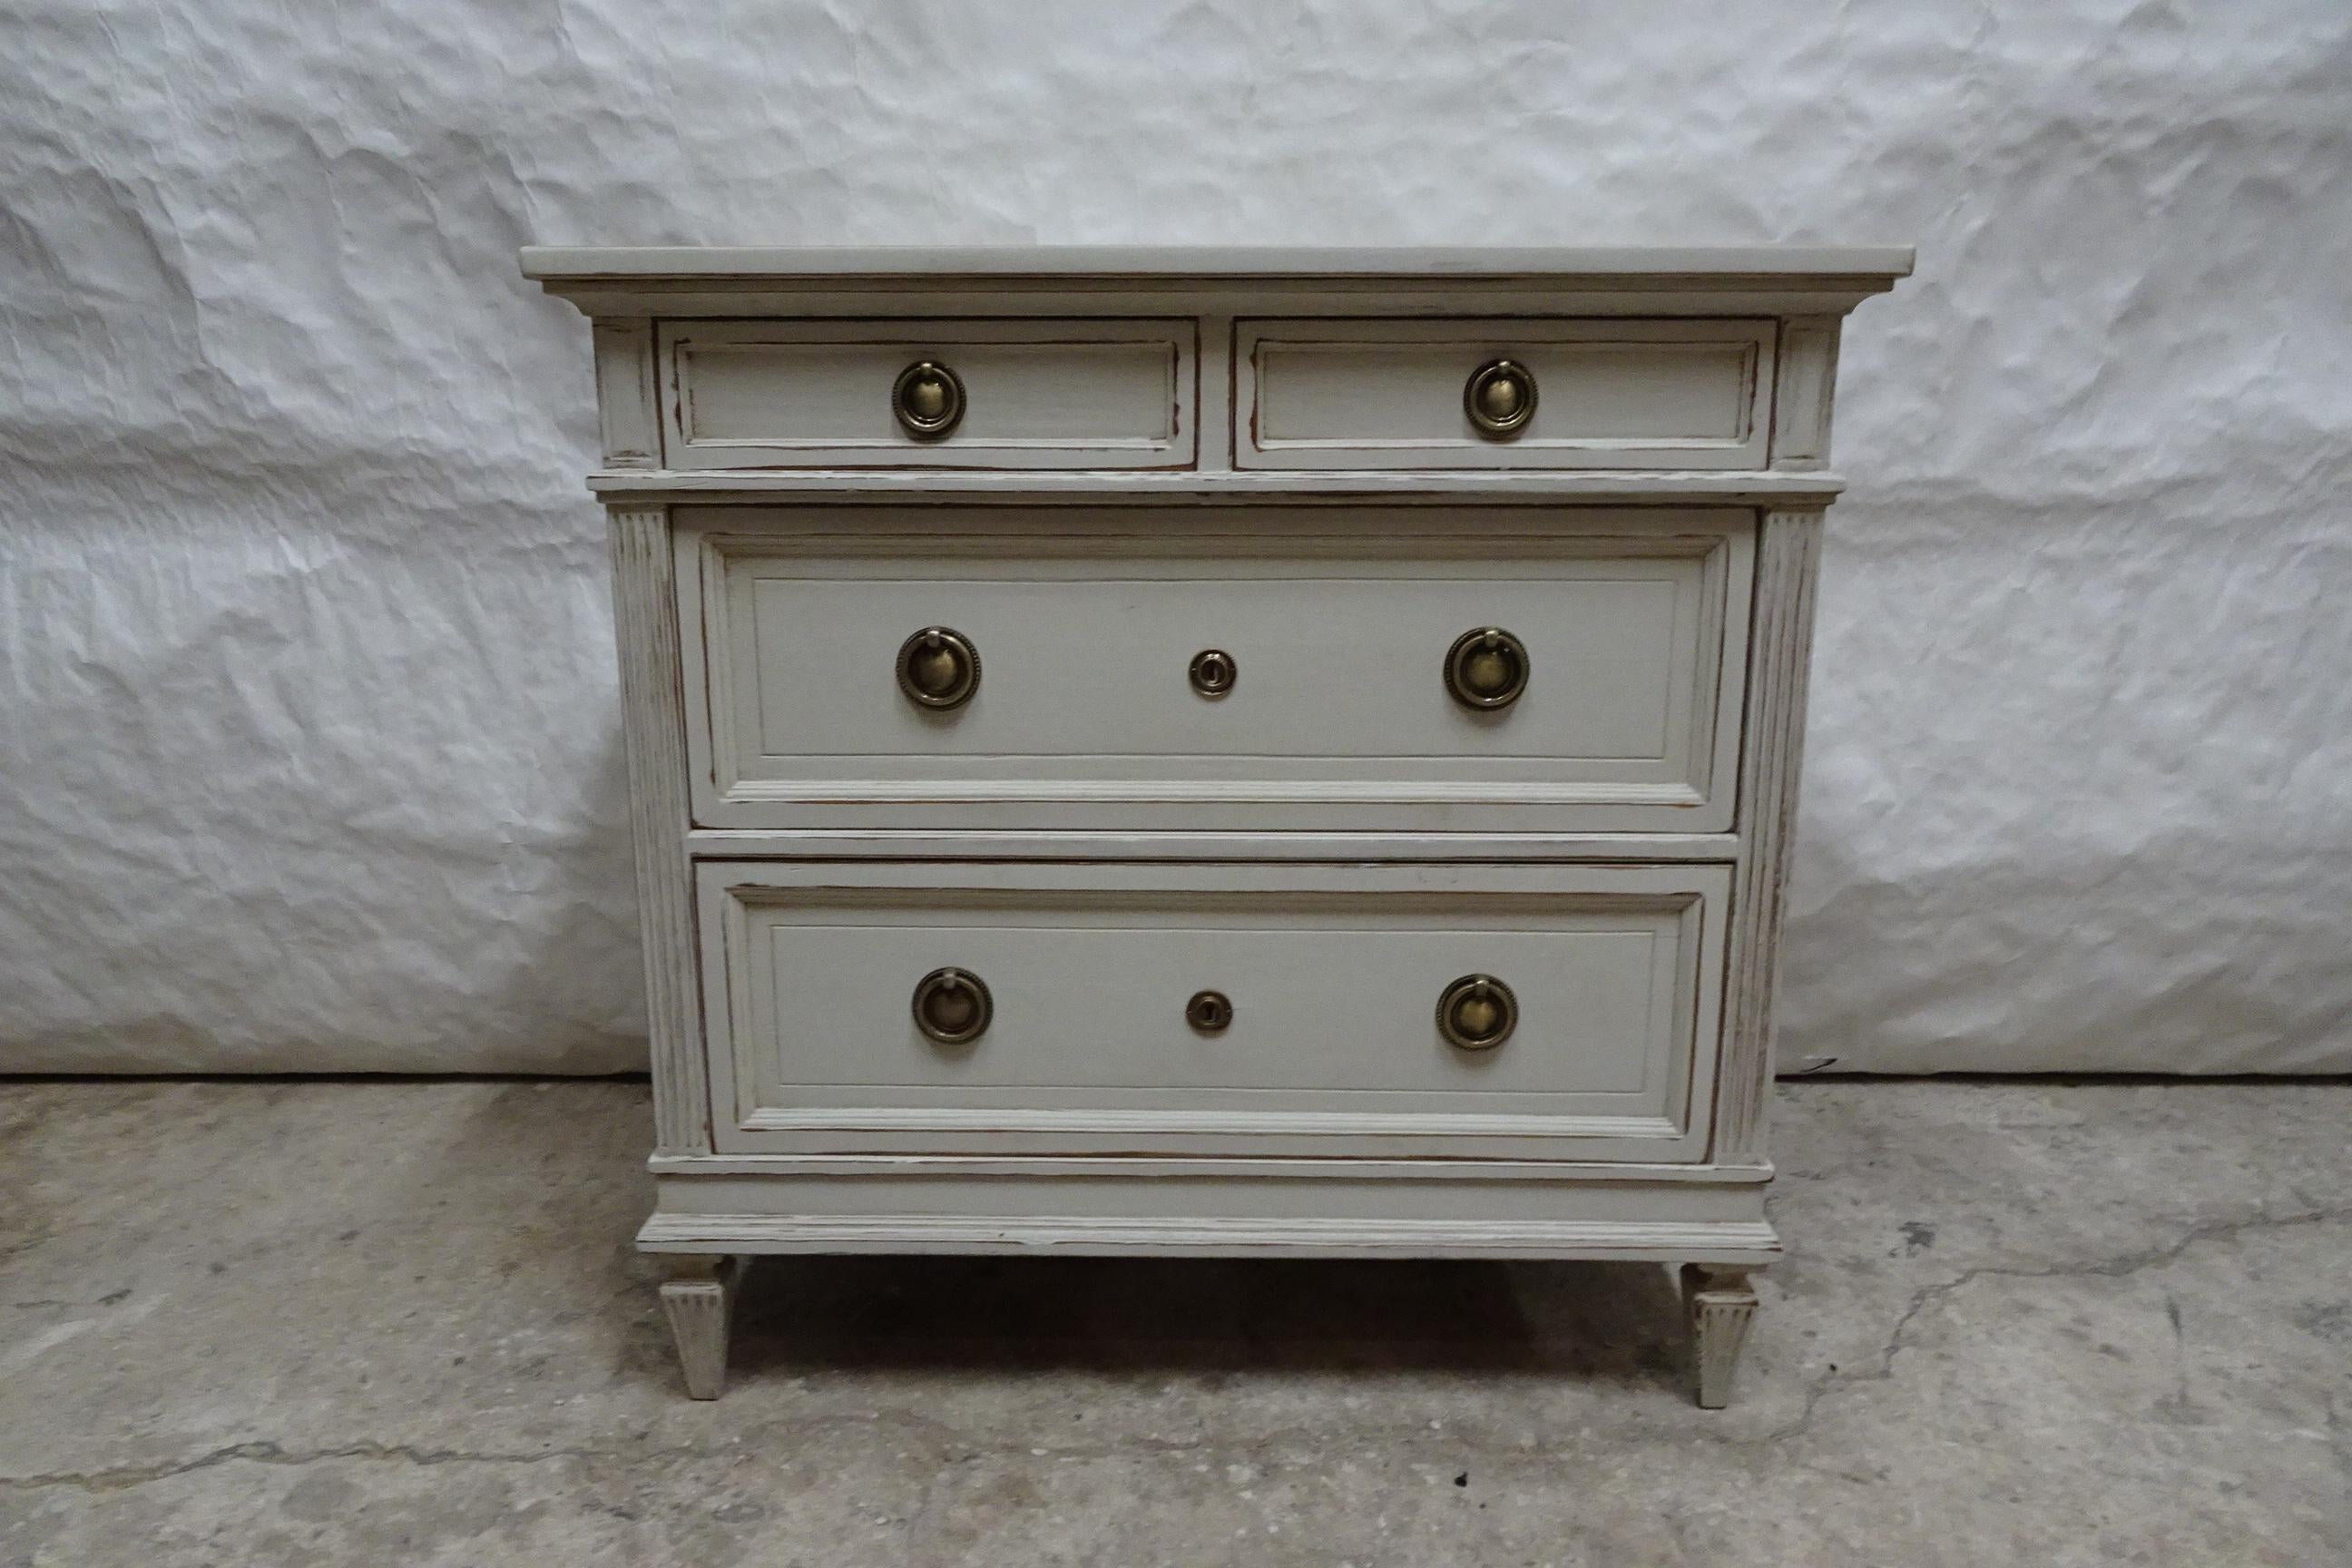 This is a Unique Swedish Gustavian Style 3 Drawer Chest Of Drawers. its been restored and repainted with Milk paints 